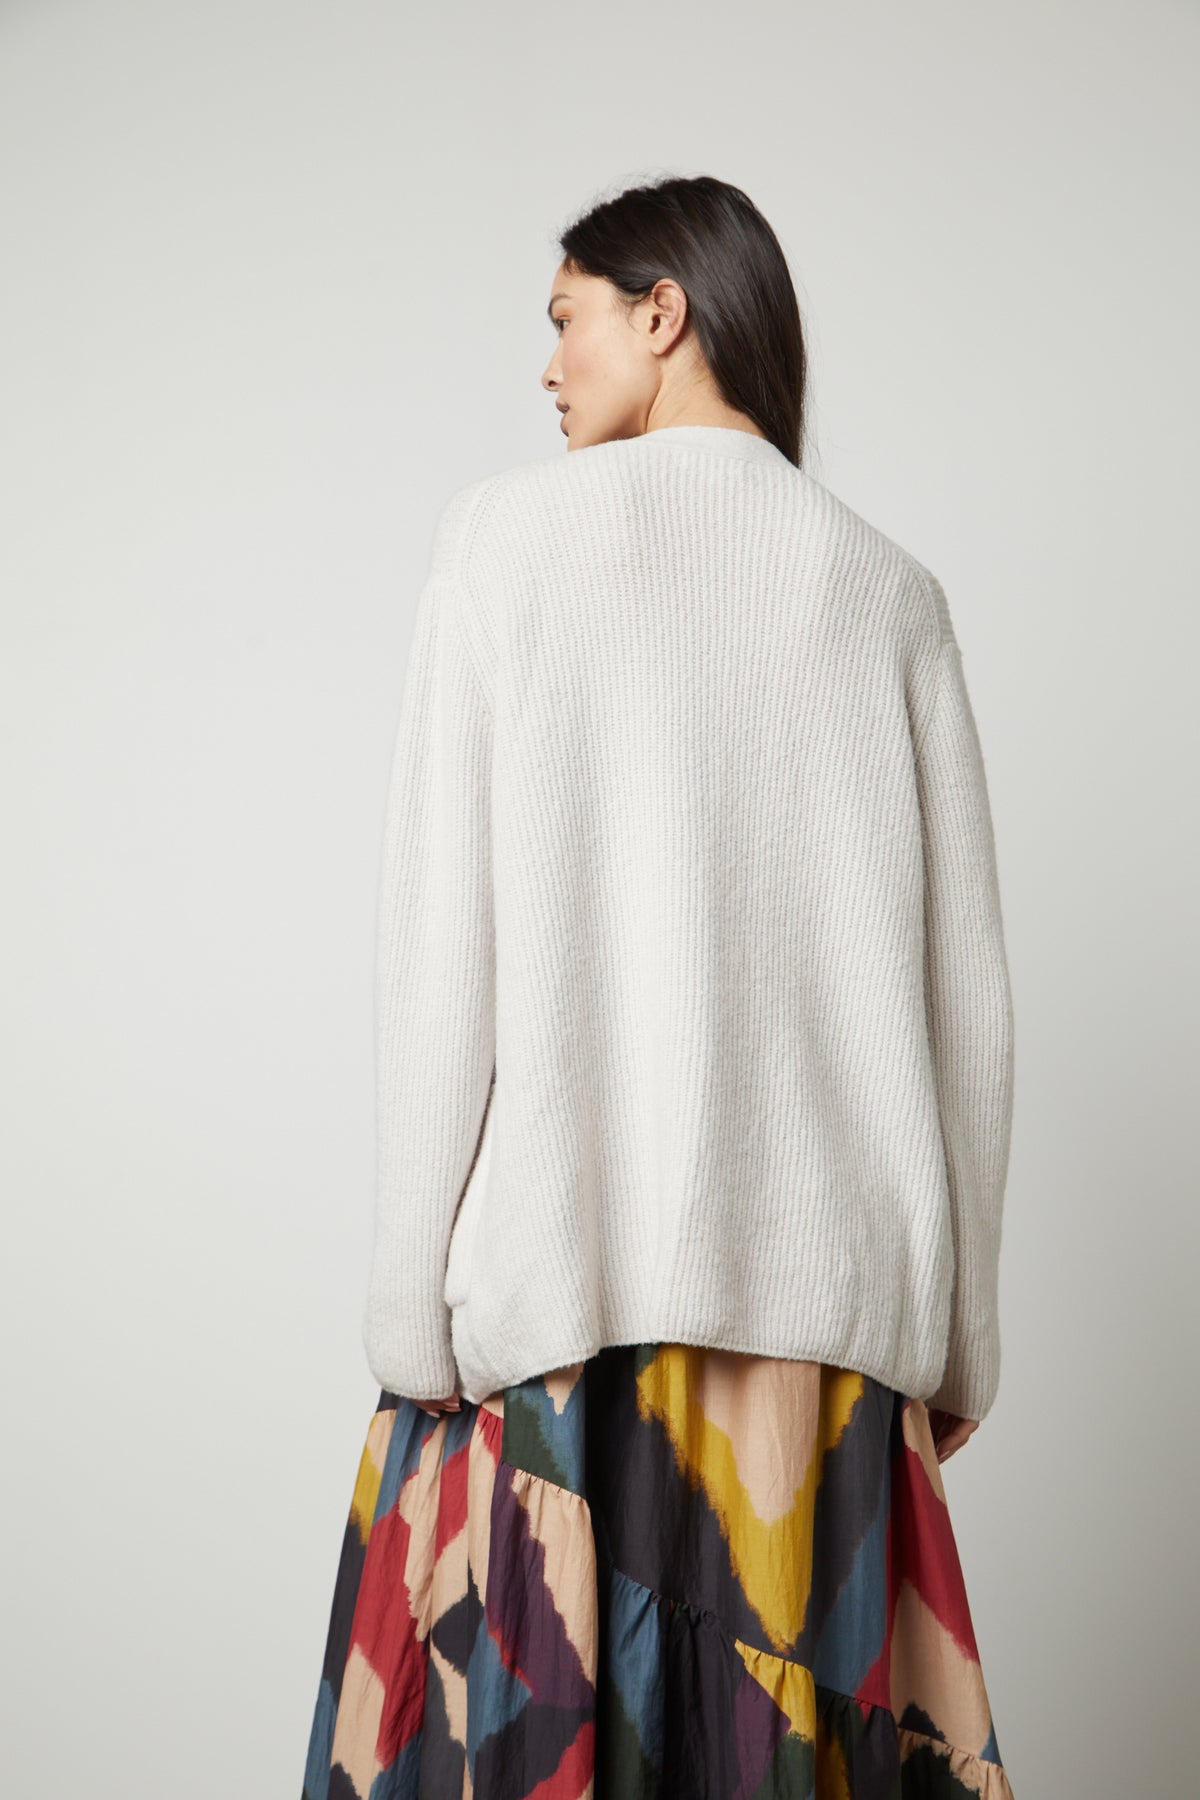   The back view of a woman wearing a Velvet by Graham & Spencer BRITT OVERSIZED CARDIGAN and multicolored skirt. 